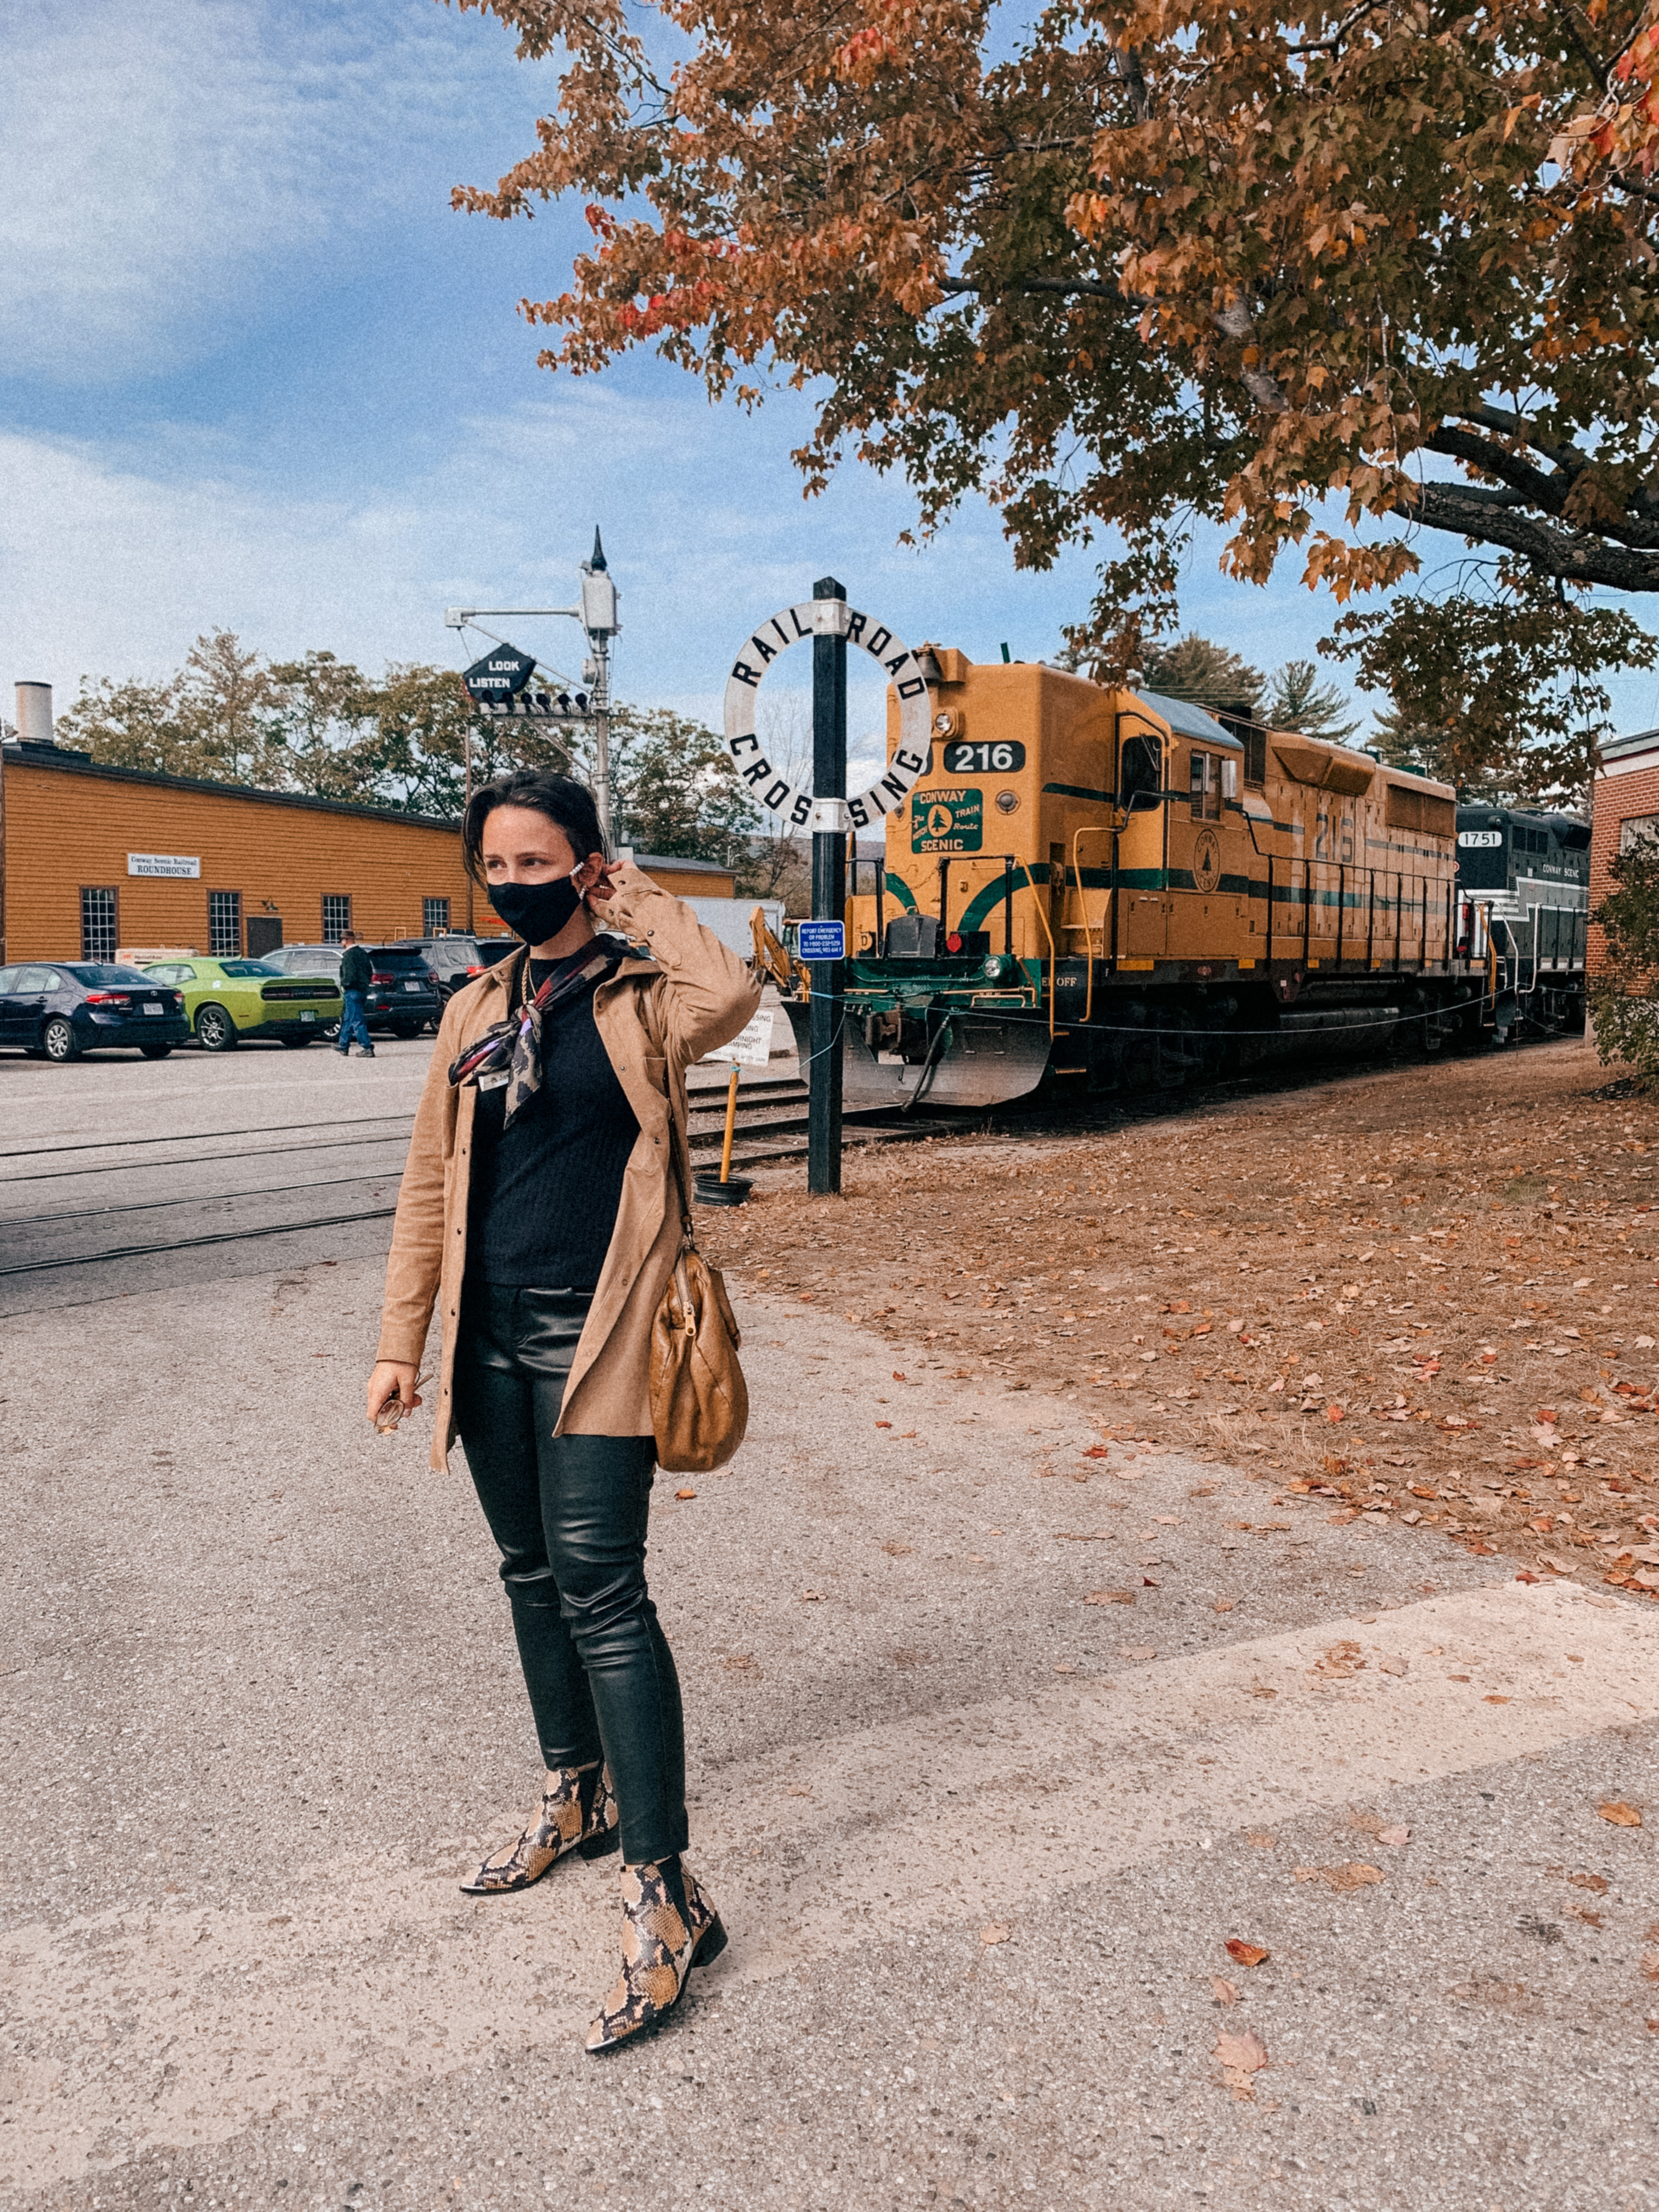 North Conway, New Hampshire Travel Guide - Conway Scenic Railroad - Simply by Simone - Simone Piliero Arena - #newengland #travel #newhampshire #roadtrip #westchestercounty #northconway #newhampshiretravel #mountwashington #newenglandtravel 